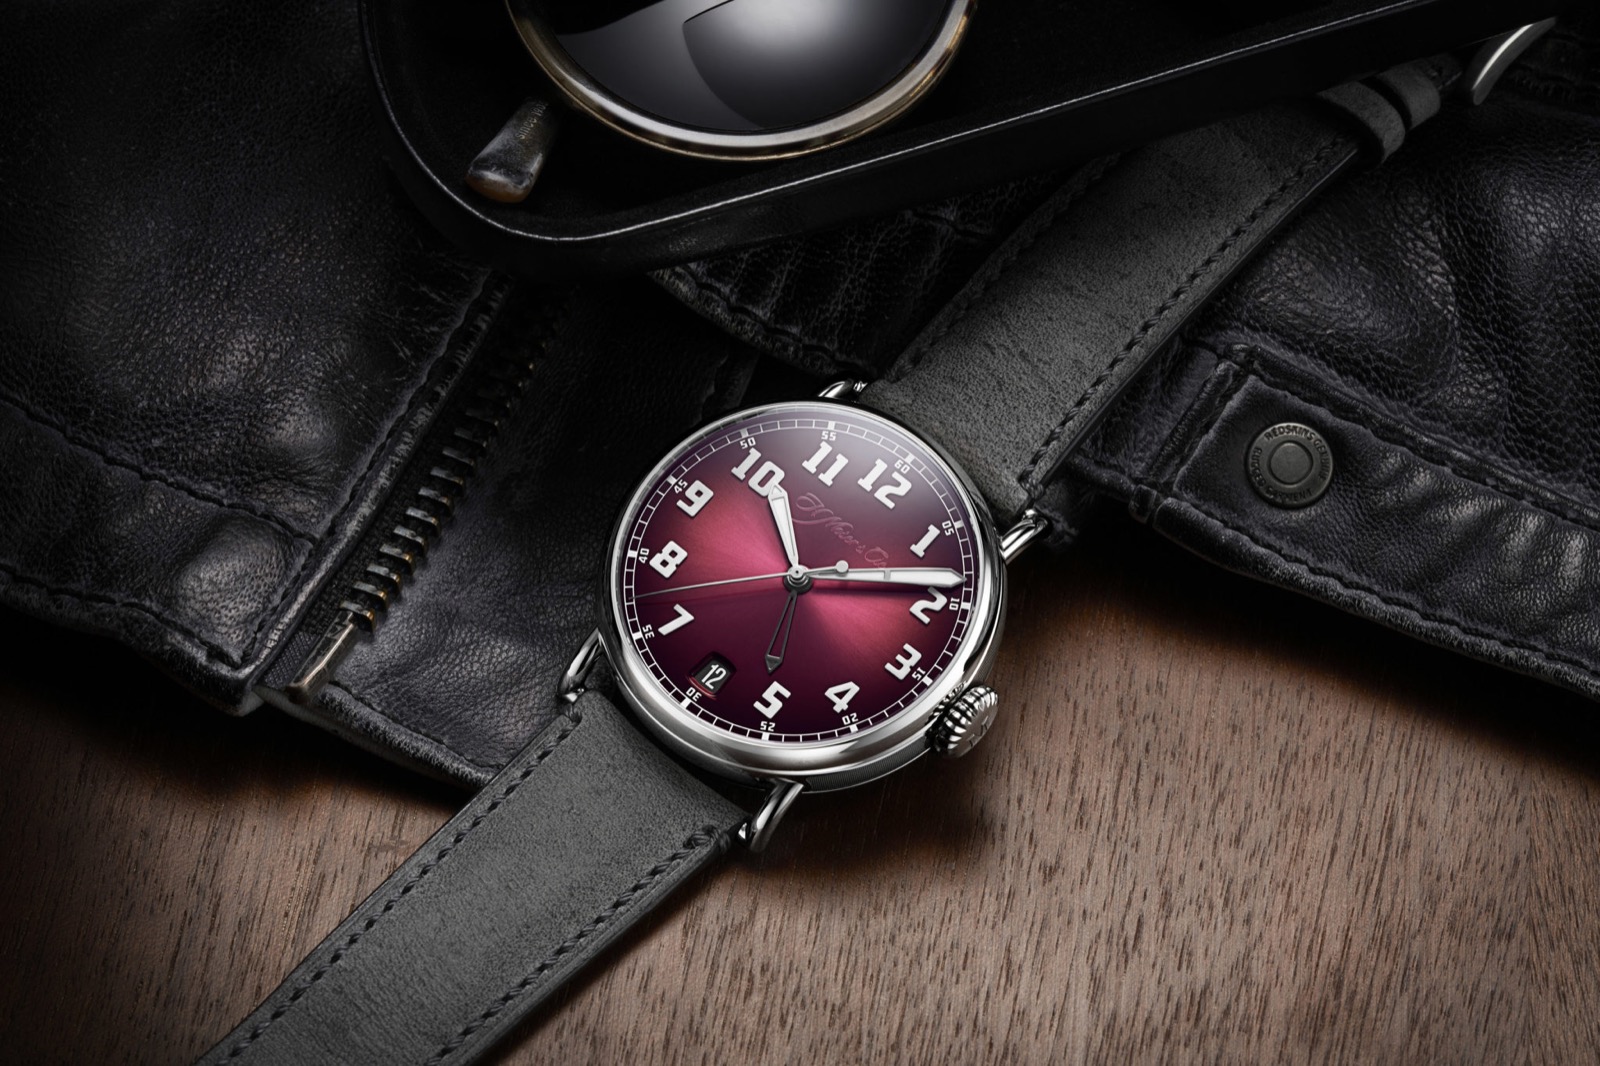 H. Moser & Cie. Heritage Dual Time “Burgundy”